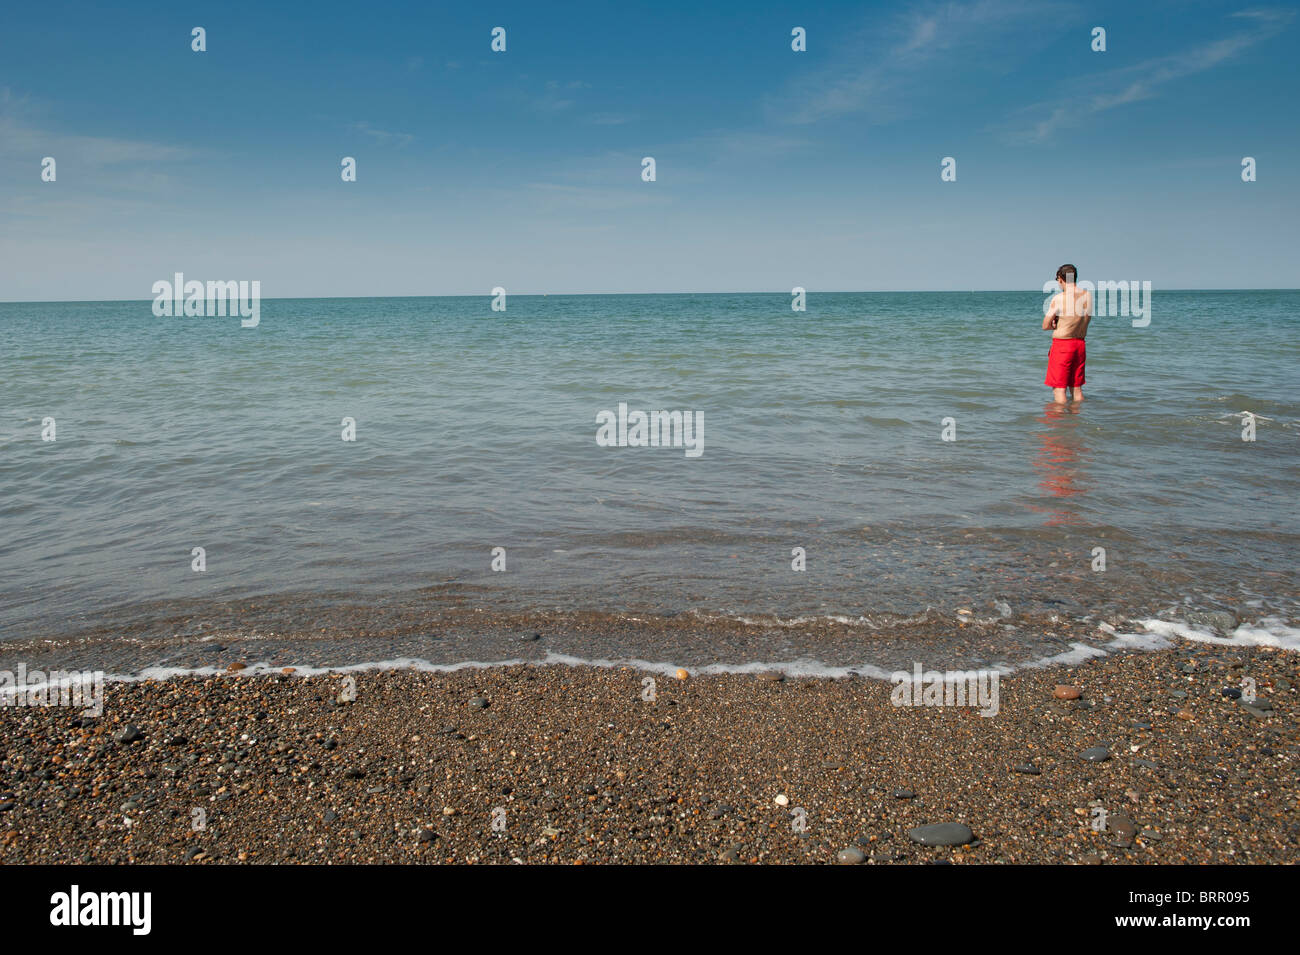 A man on holiday standing alone in the sea wearing red shorts, Aberystwyth wales UK Stock Photo